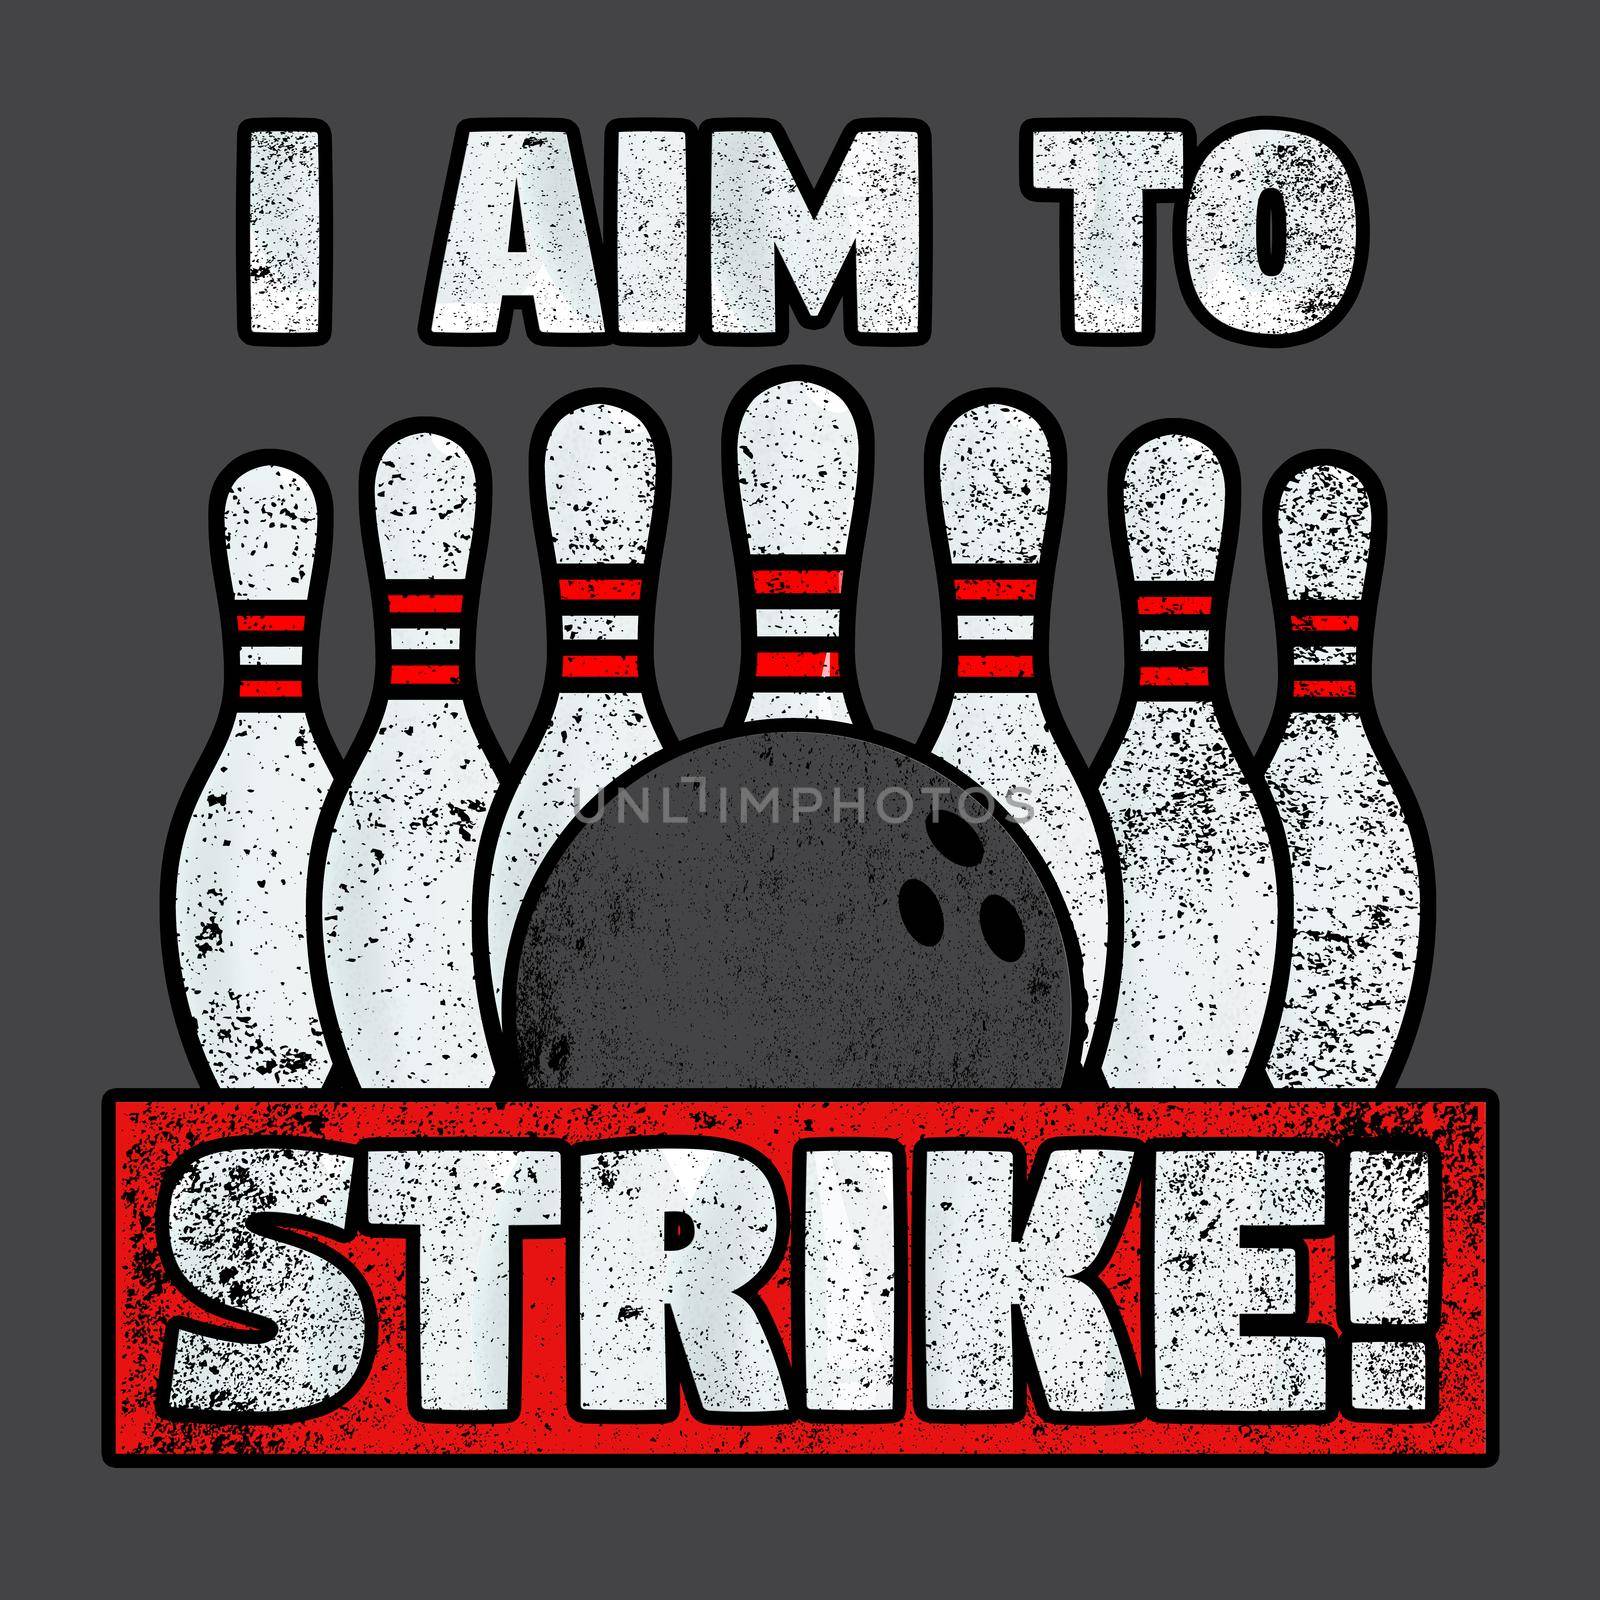 A bowling ball and pins with the text "I am to strike".